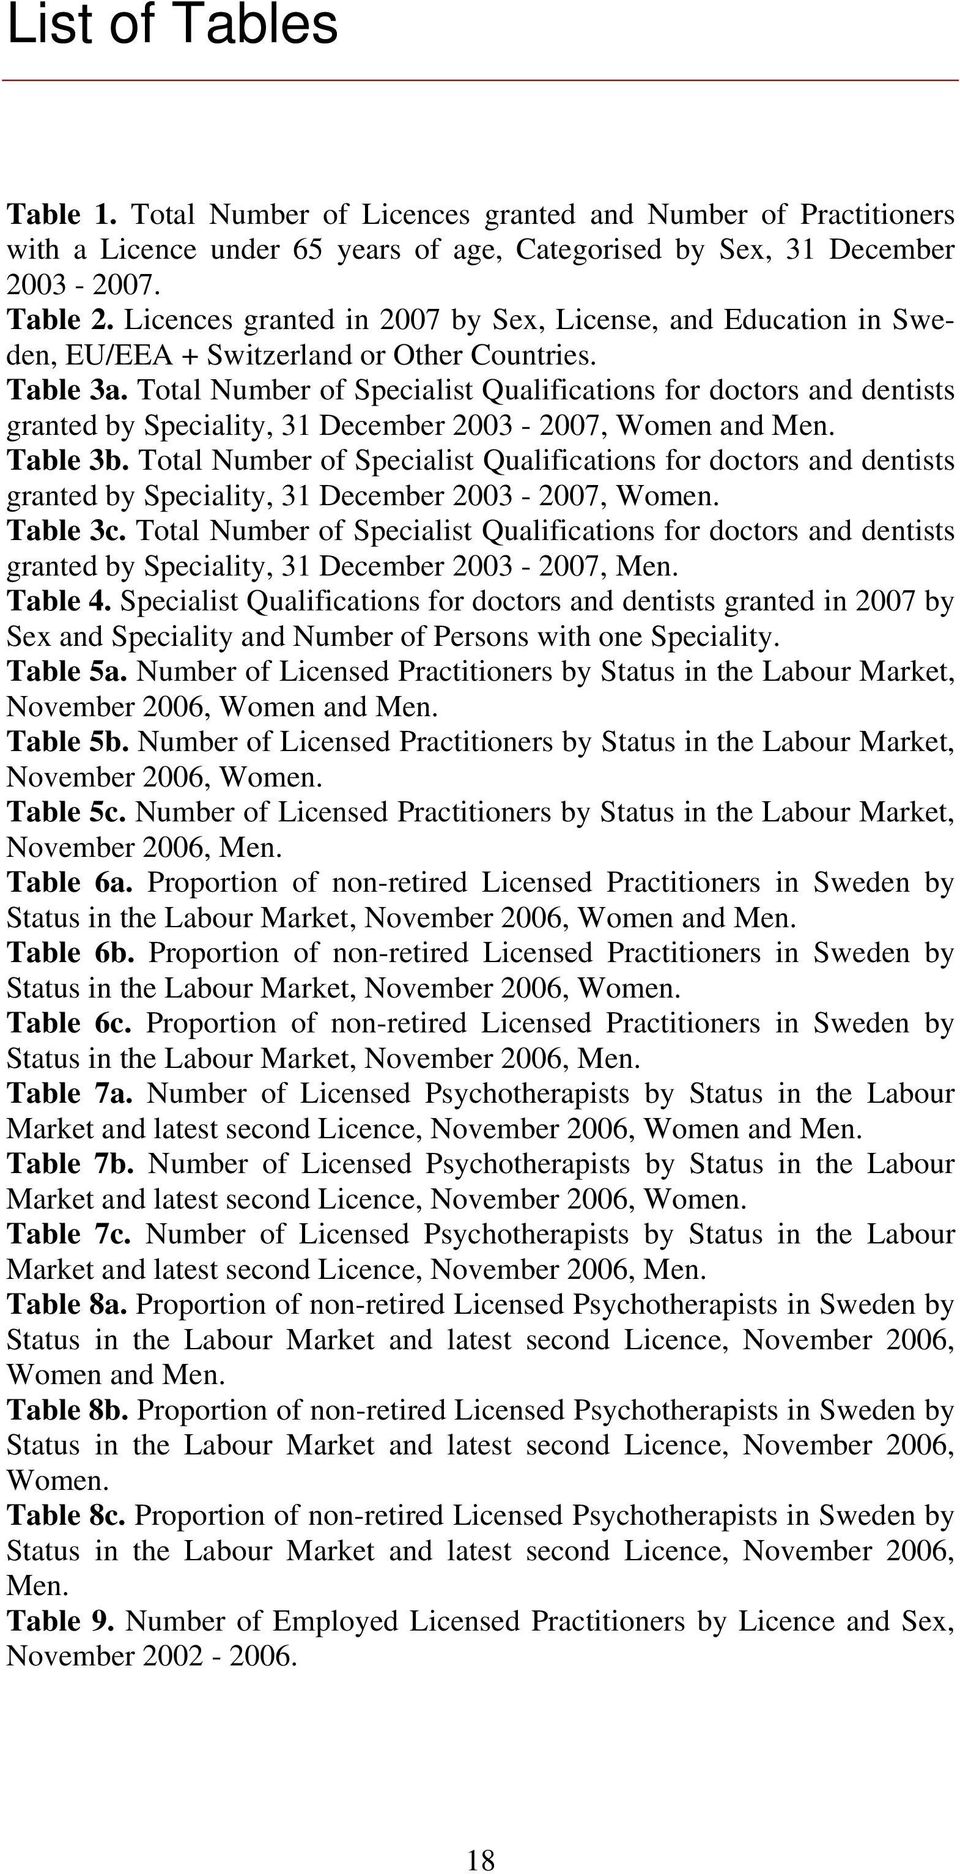 Total Number of Specialist Qualifications for doctors and dentists granted by Speciality, 31 December 2003-2007, Women and Men. Table 3b.